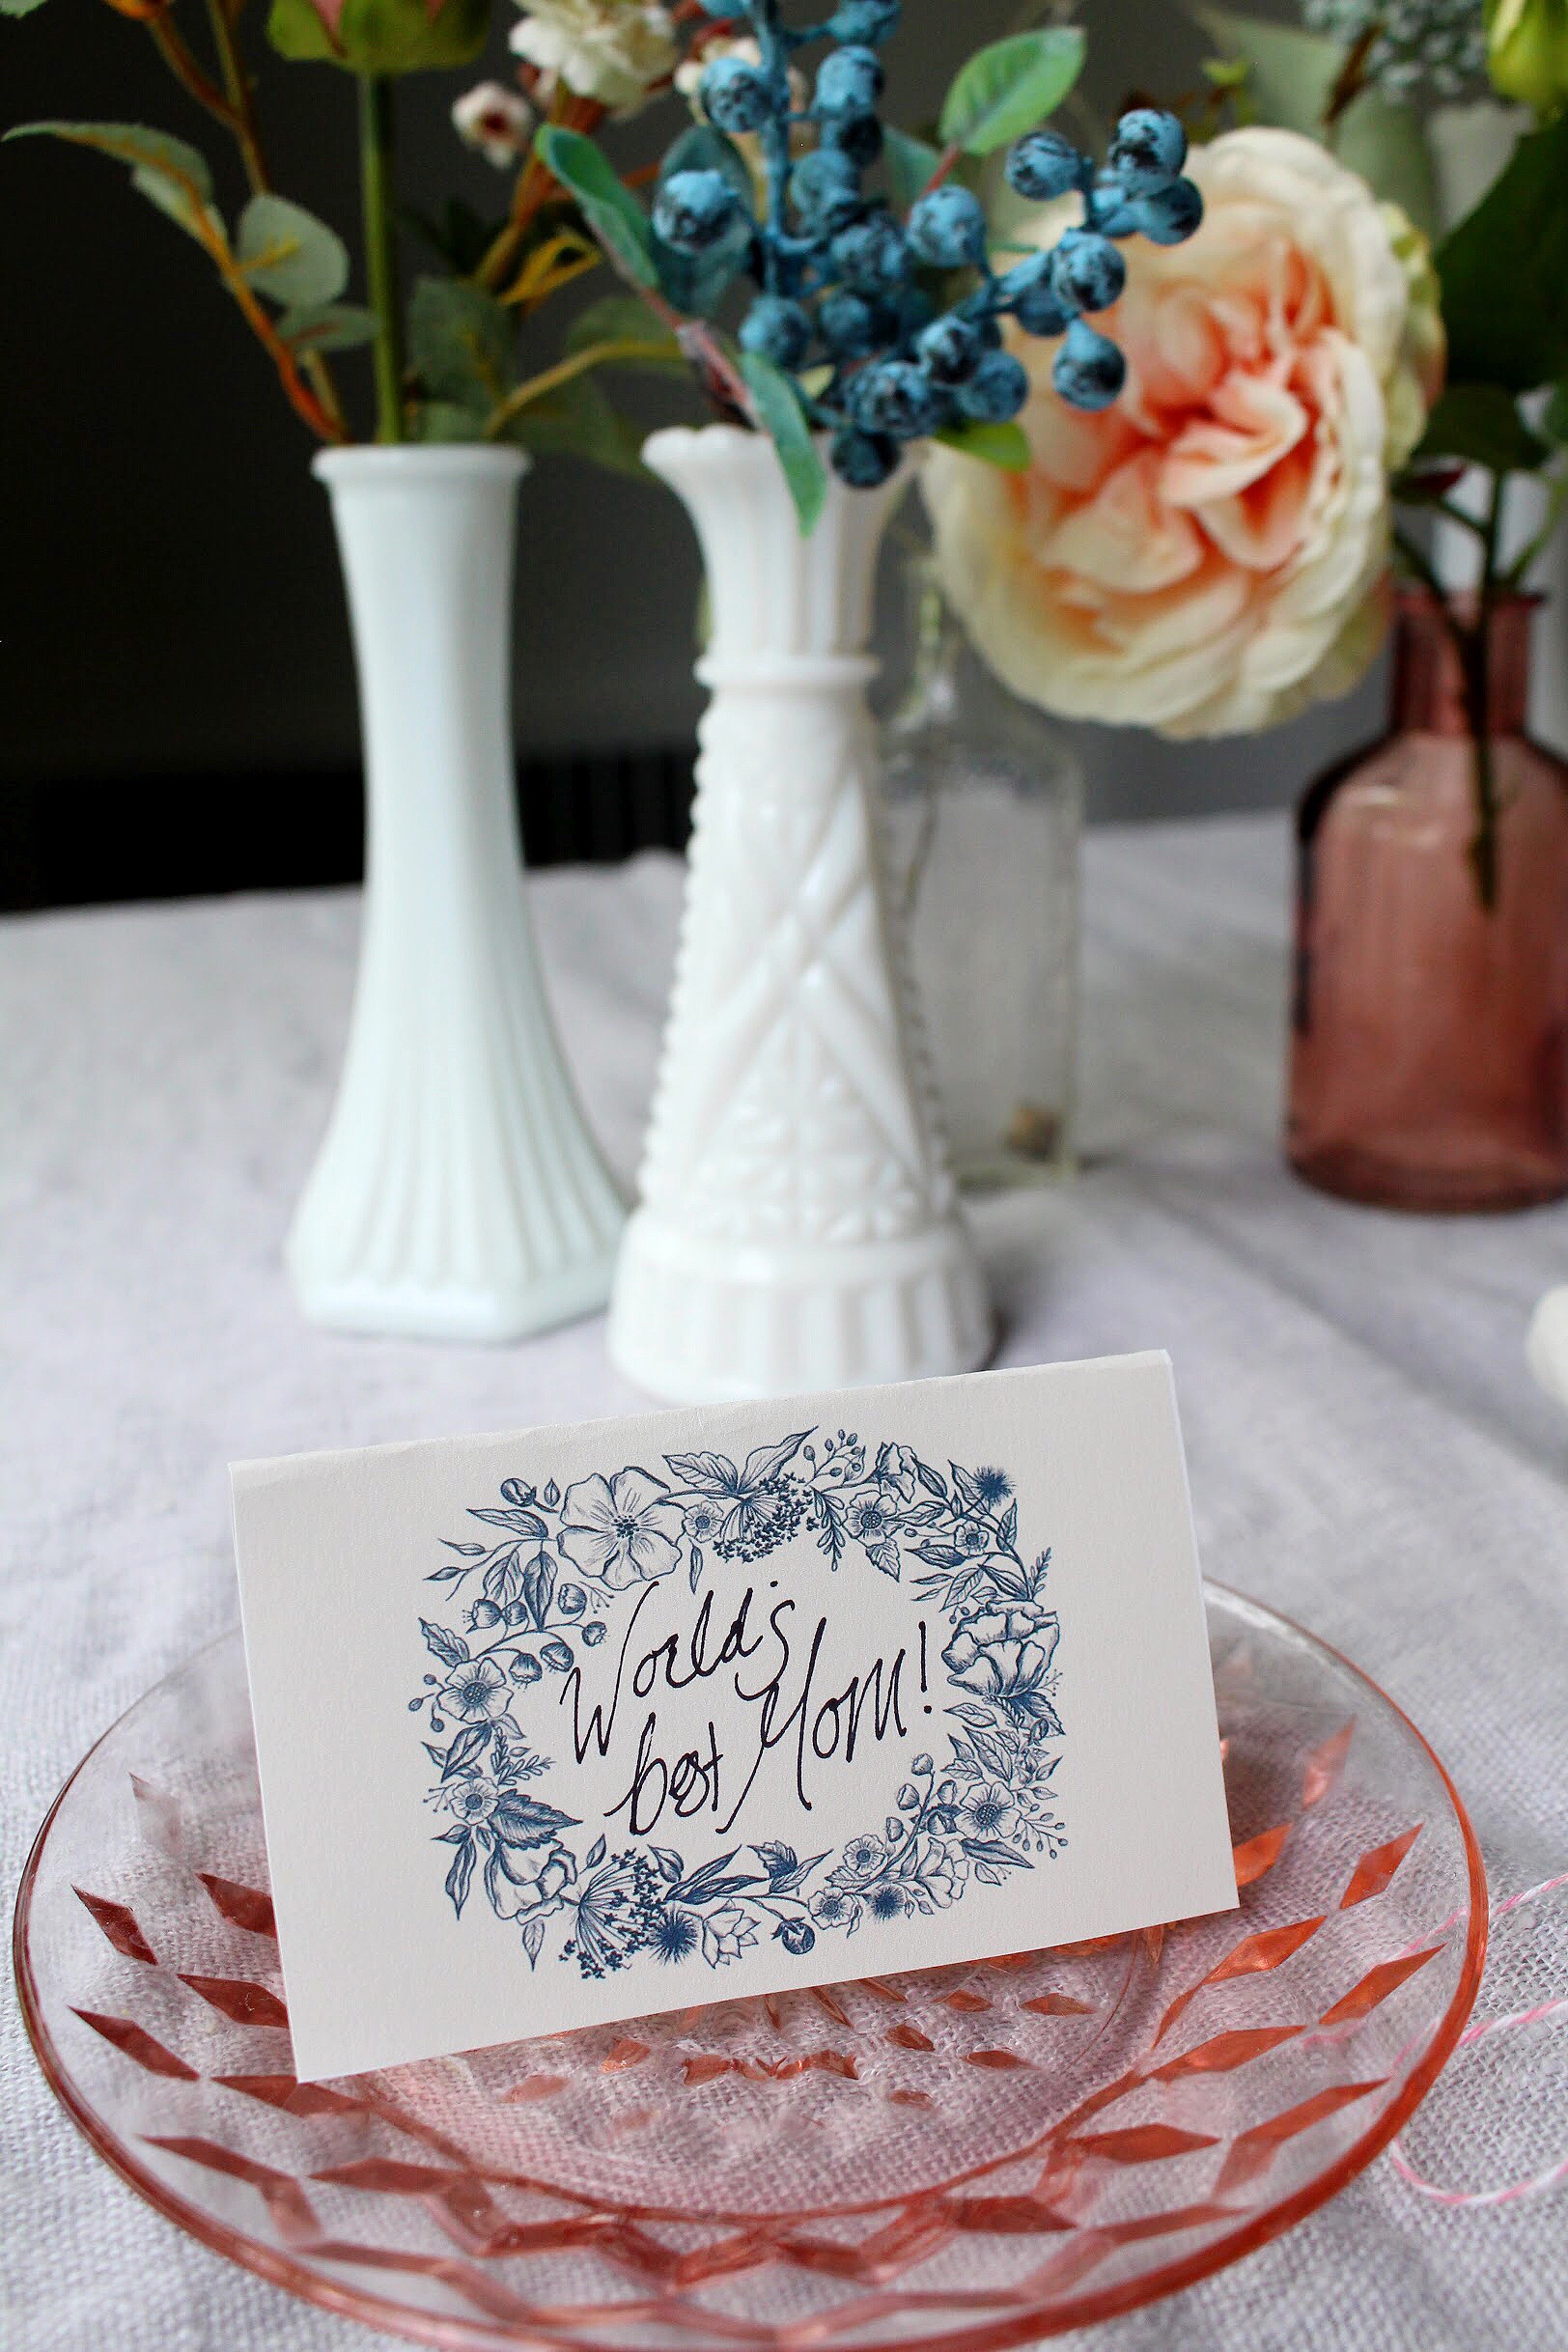 Using Wedding Downloads for Your Mother's Day Table Decor